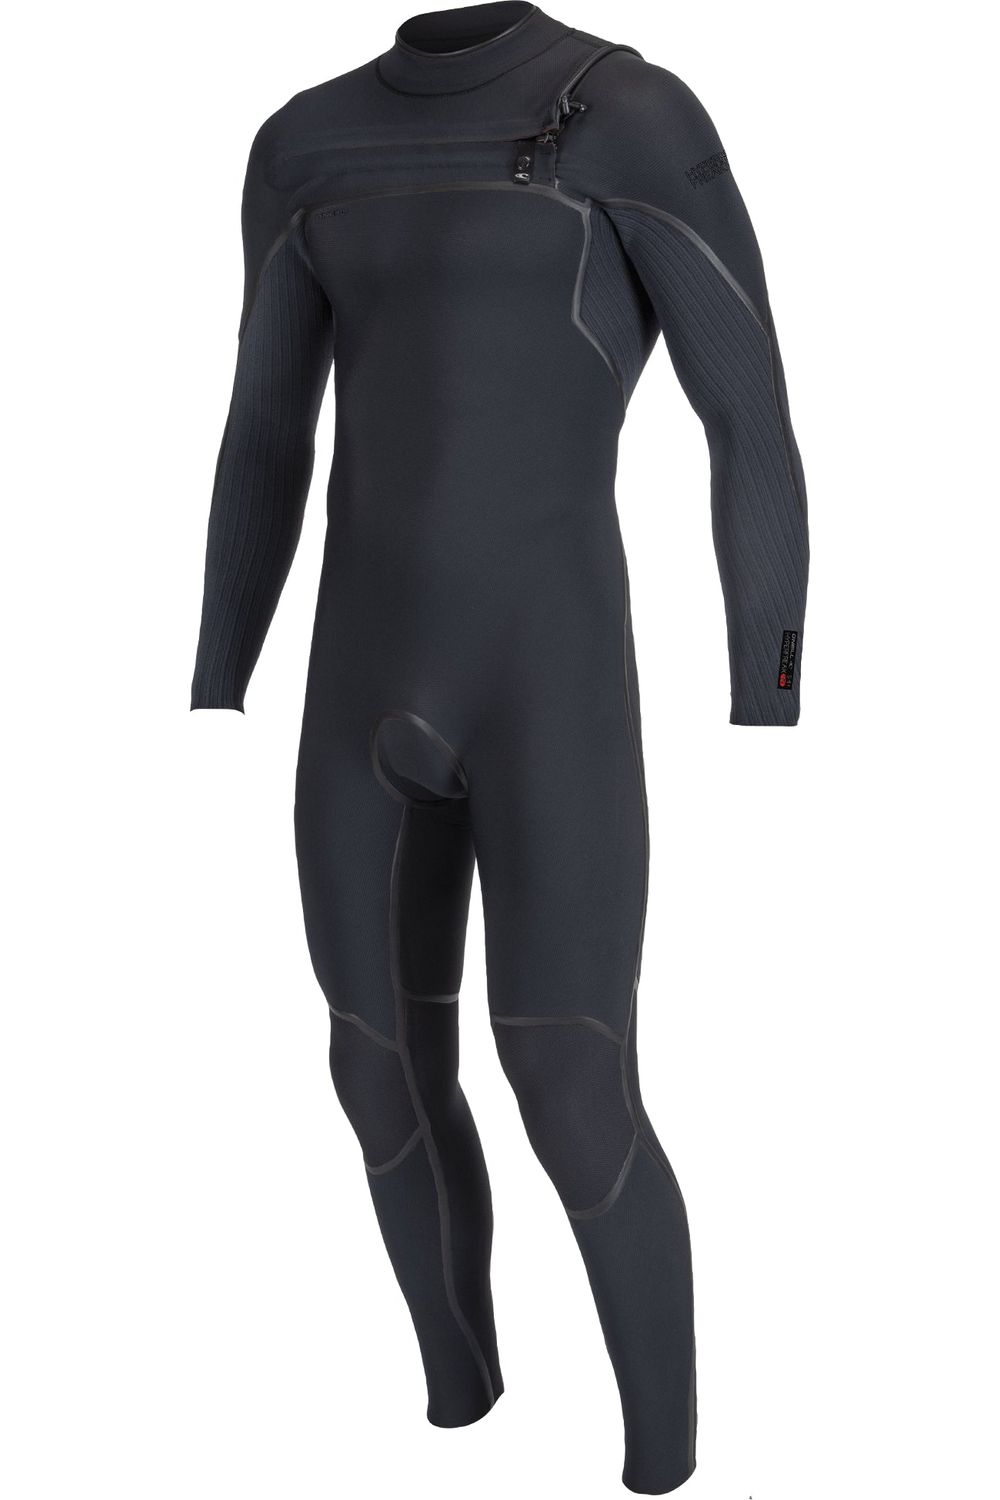 O'Neill Hyperfreak Fire Wetsuit 5/4+ With Chest Zip In Full Black